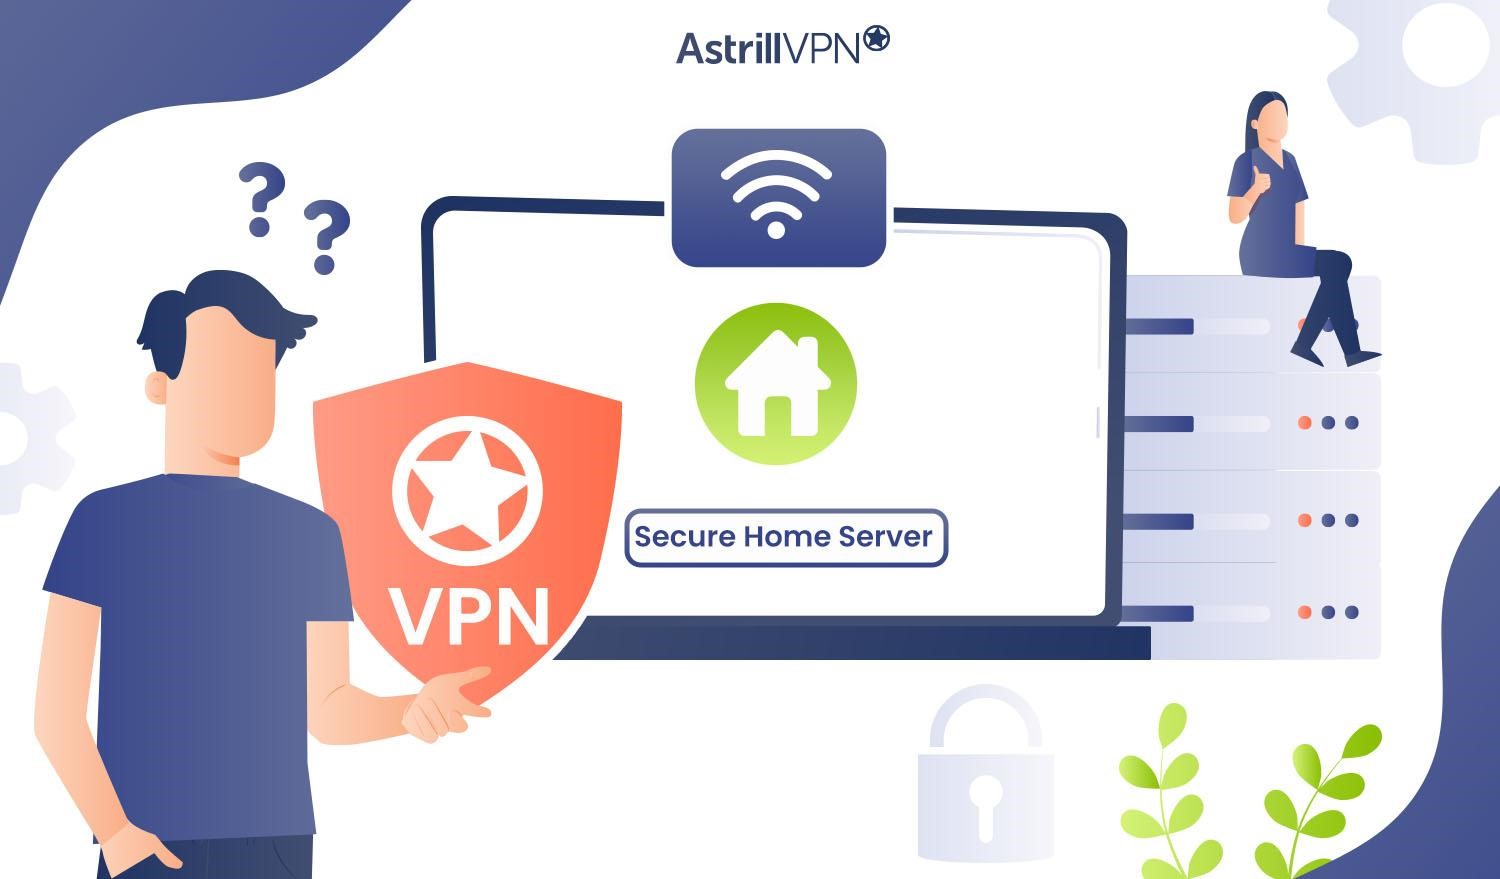 How to Secure a Home Server with AstrillVPN